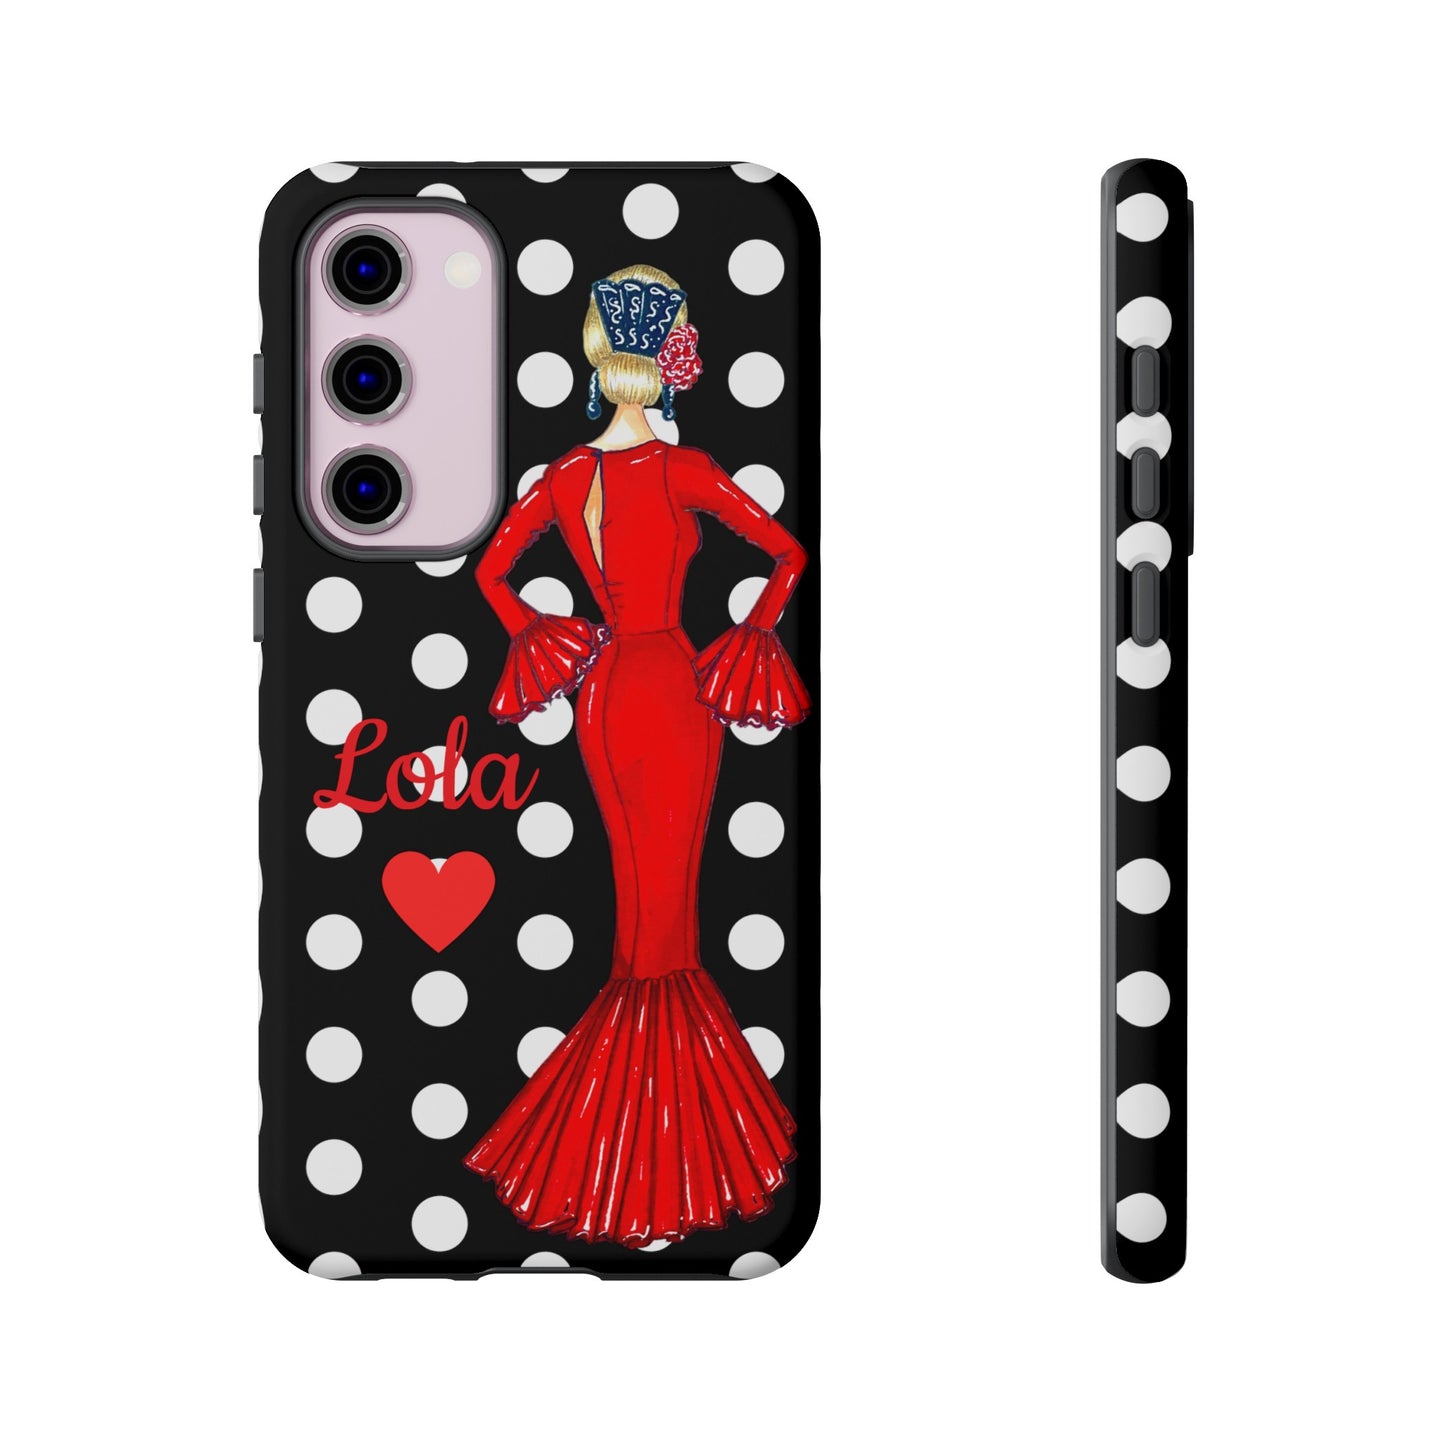 Flamenco Dancer customizable black Phone Case for iPhone, Samsung Galaxy, and Google Pixel, flamenco dancer Maria in a red dres, black background with polka dots.